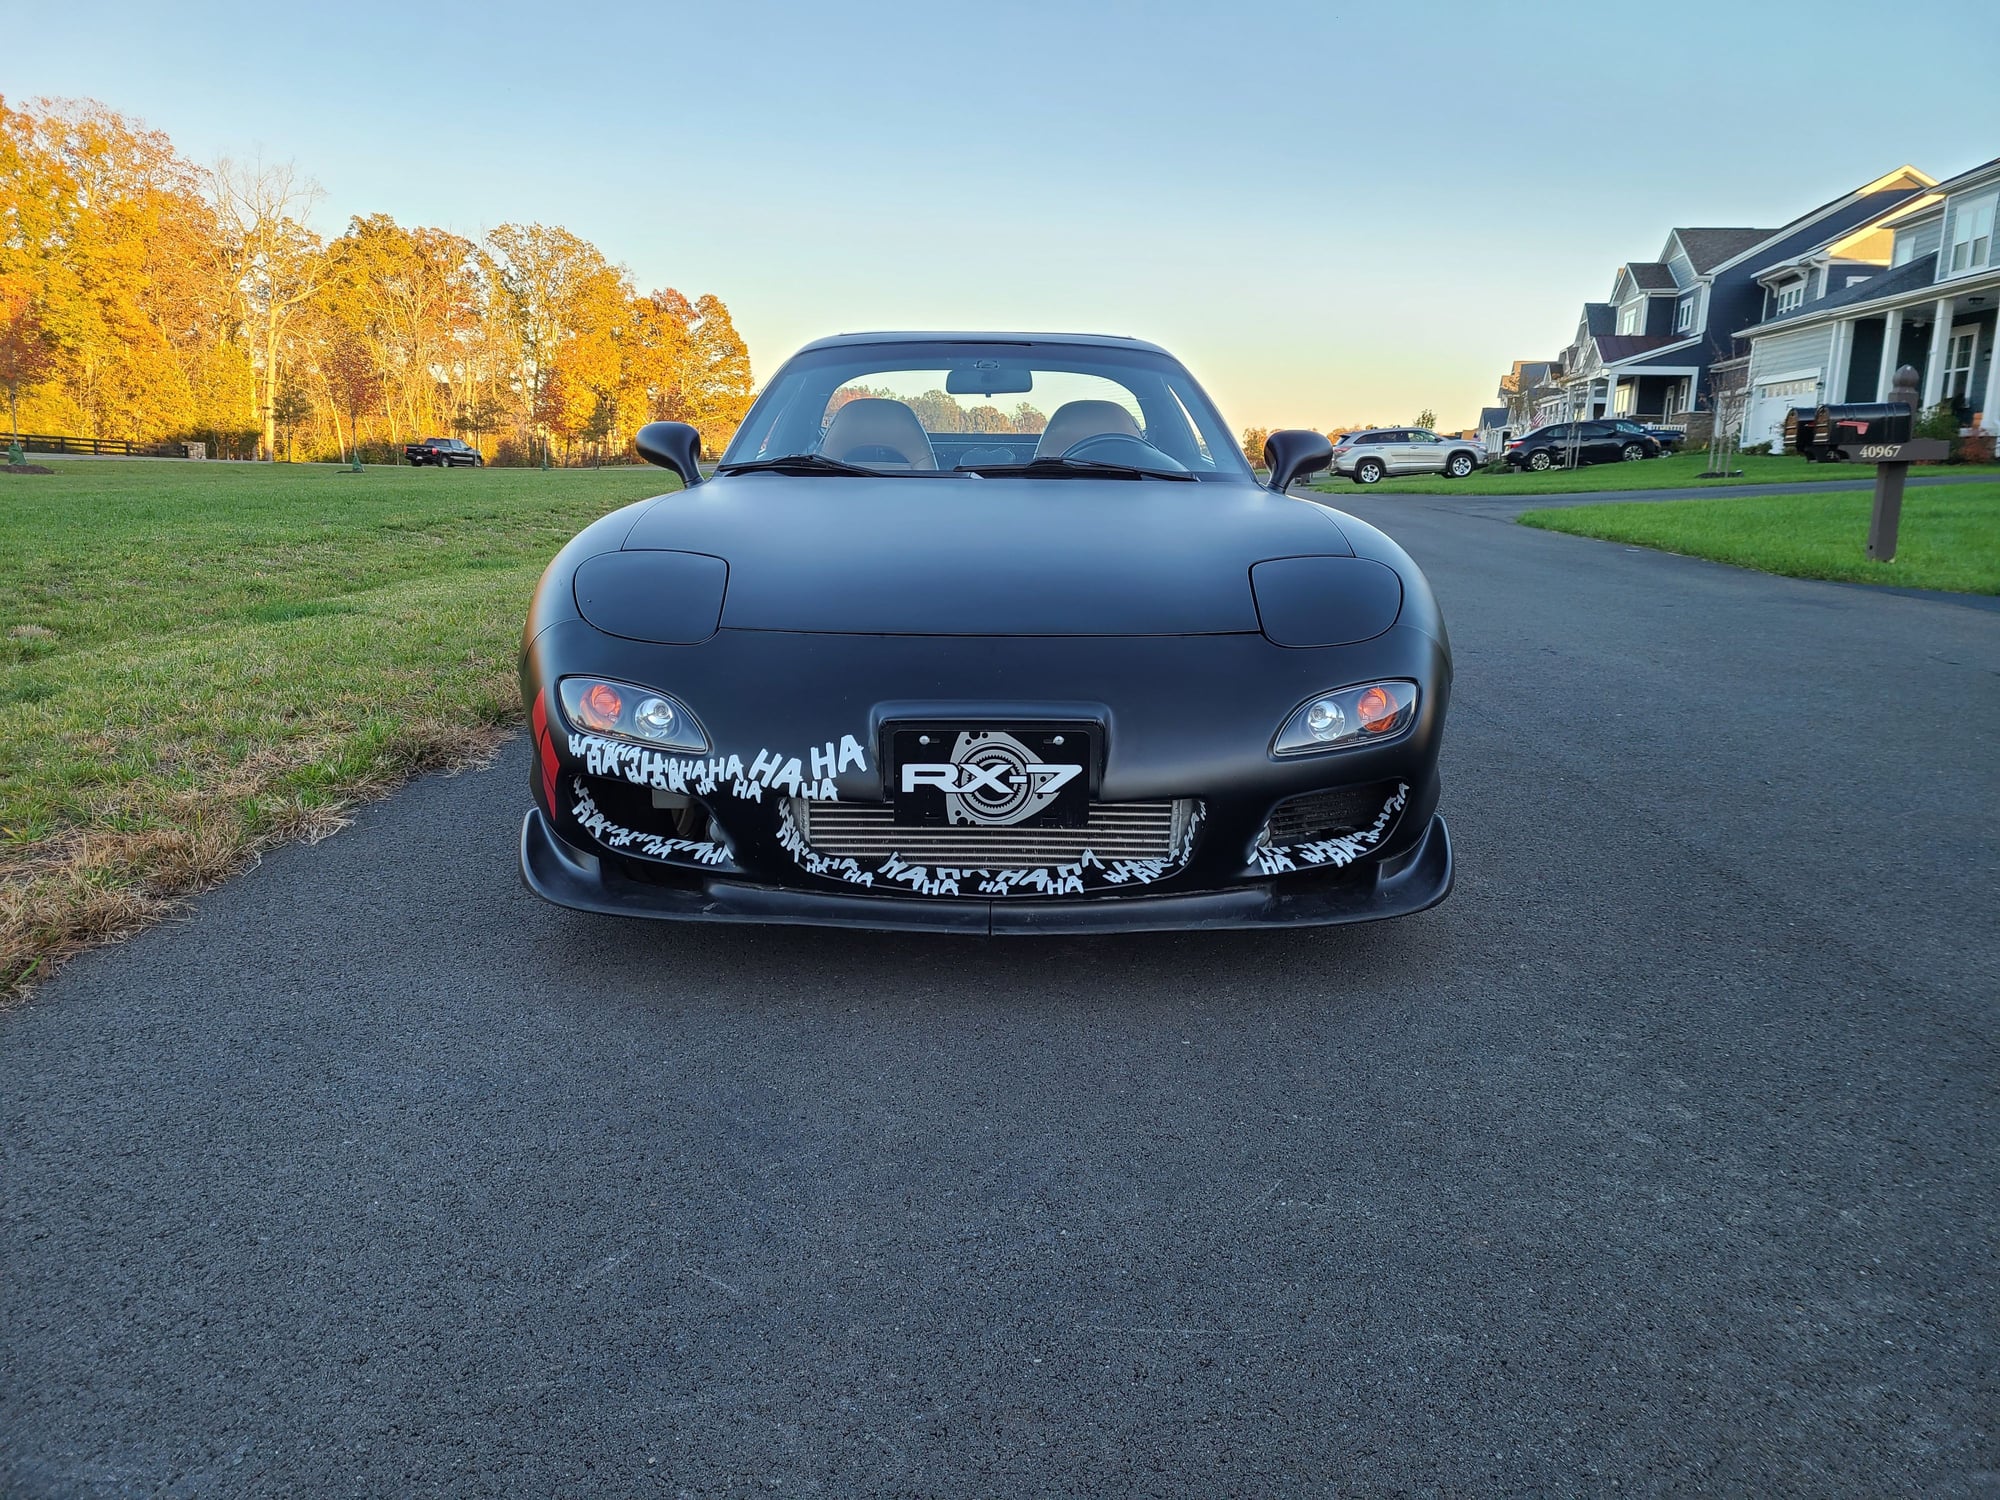 1994 Mazda RX-7 - 1994 RX-7 Single Turbo Bridgeport - Used - VIN JM1FD333XR0301653 - 134,000 Miles - 2 cyl - 2WD - Manual - Coupe - Other - Aldie, VA 20105, United States